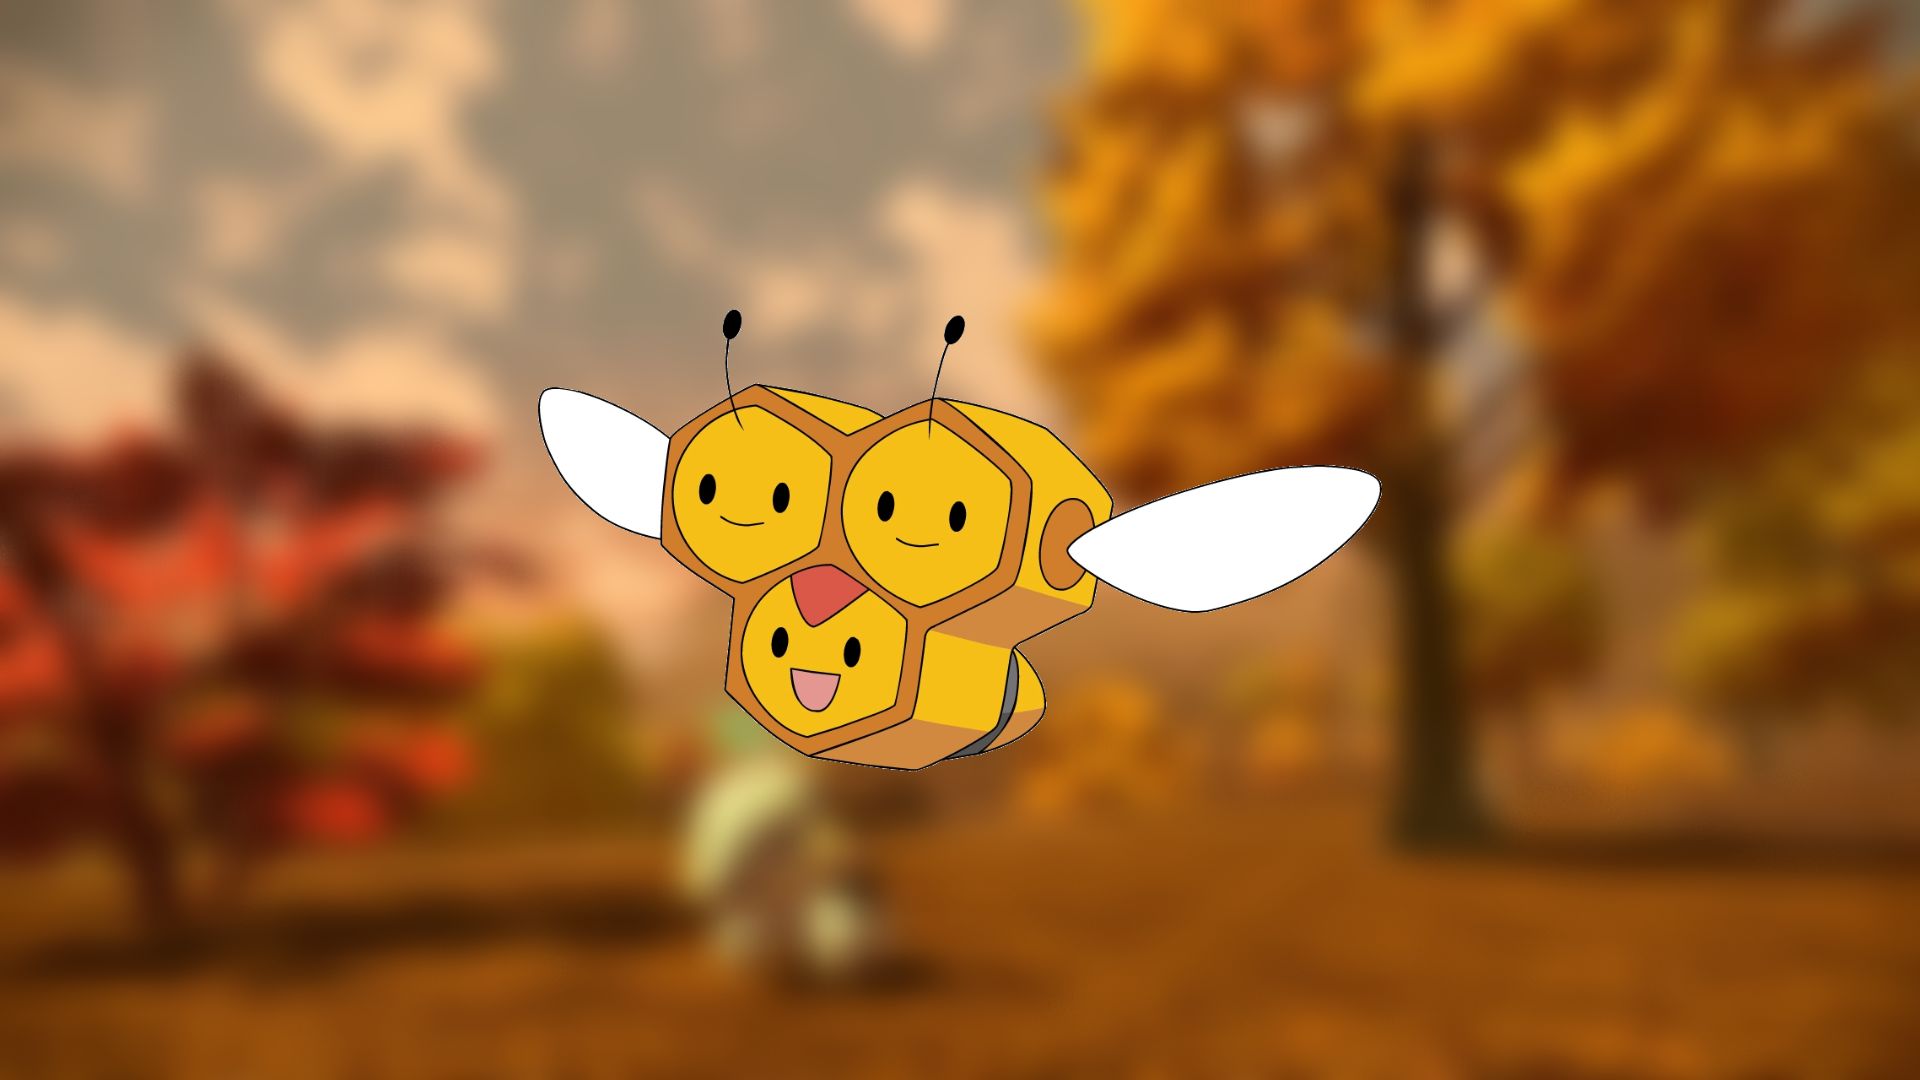 Cutest Pokémon - Combee. Its official artwork is over blurred scenery from Pokémon Legends: Arceus.